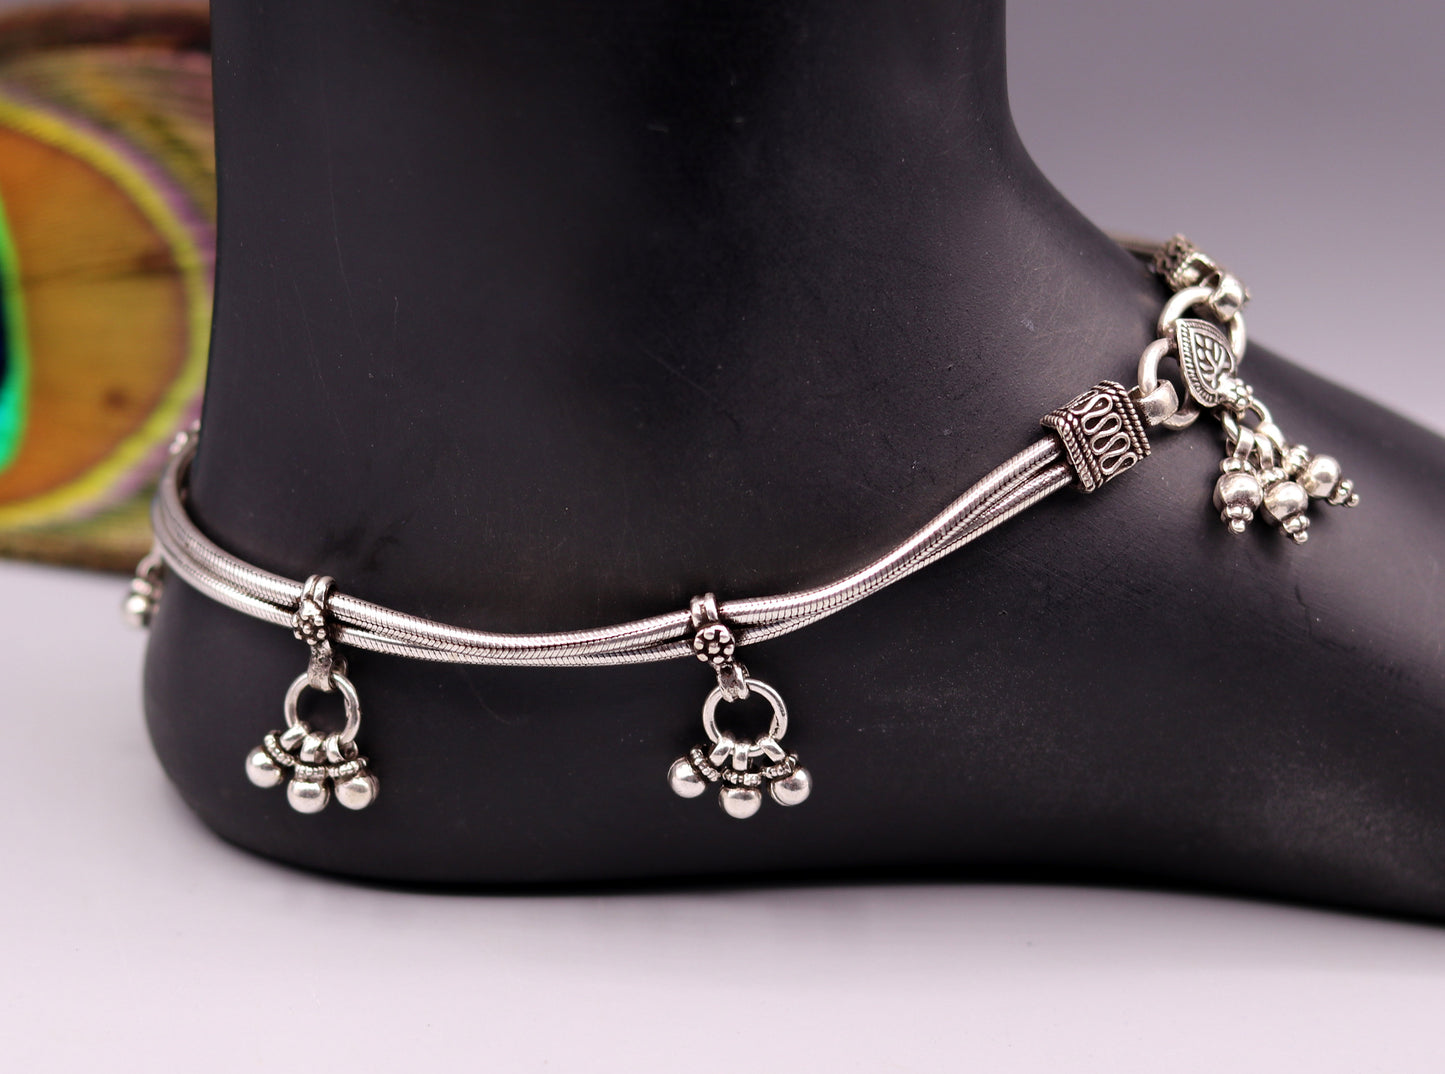 925 Sterling silver handmade charm ankle jewelry vintage design anklet foot bracelet with hanging bells tribal belly dance jewelry ank121 - TRIBAL ORNAMENTS